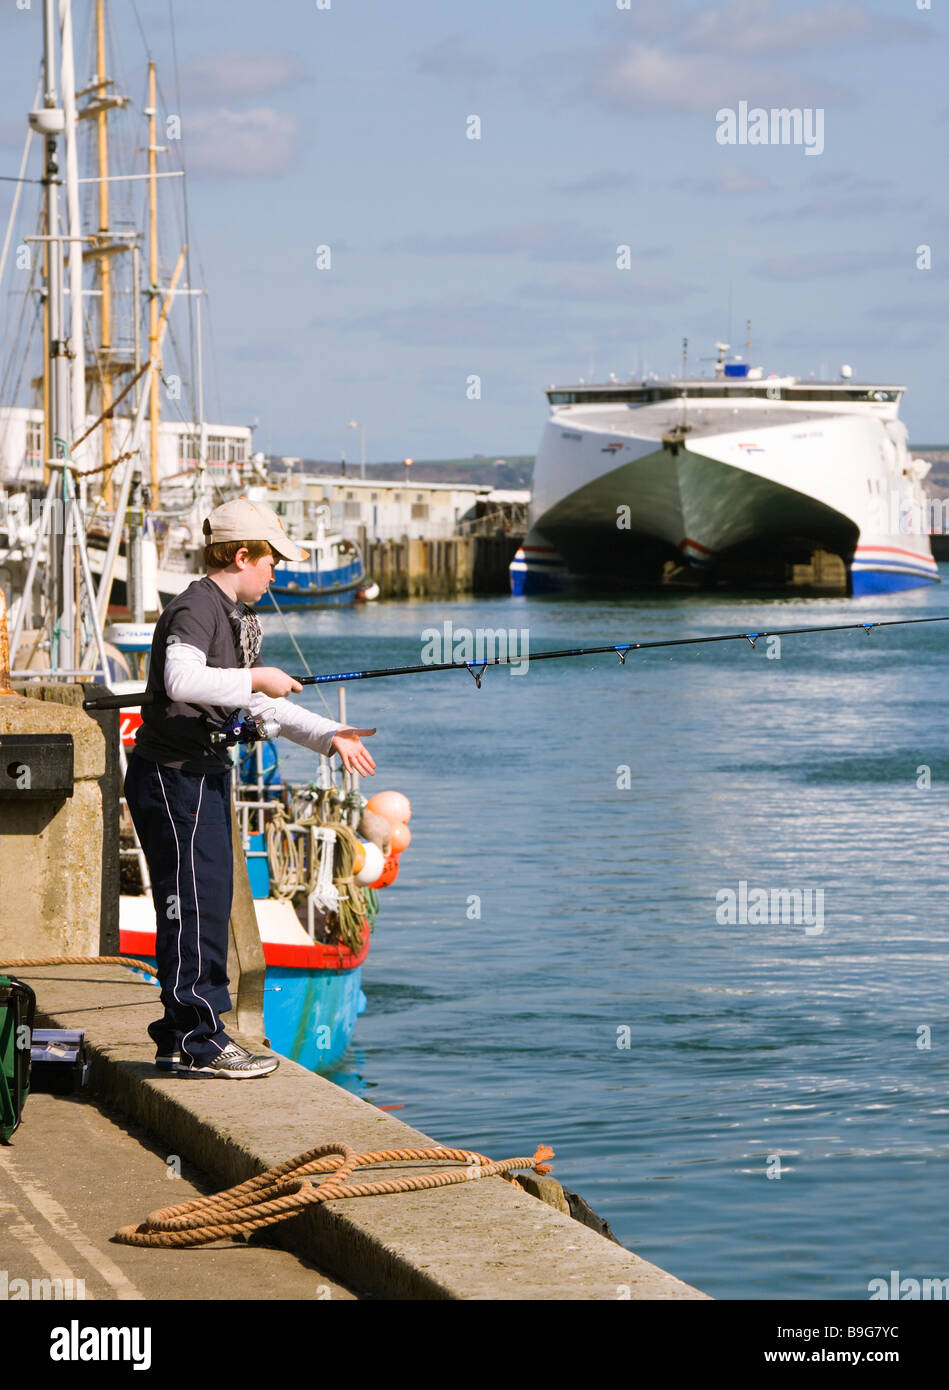 A young boy fishing off Weymouth harbour wall. Dorset. UK.  Cross channel ferry, the Condor Ferries catamaran at berth. Stock Photo